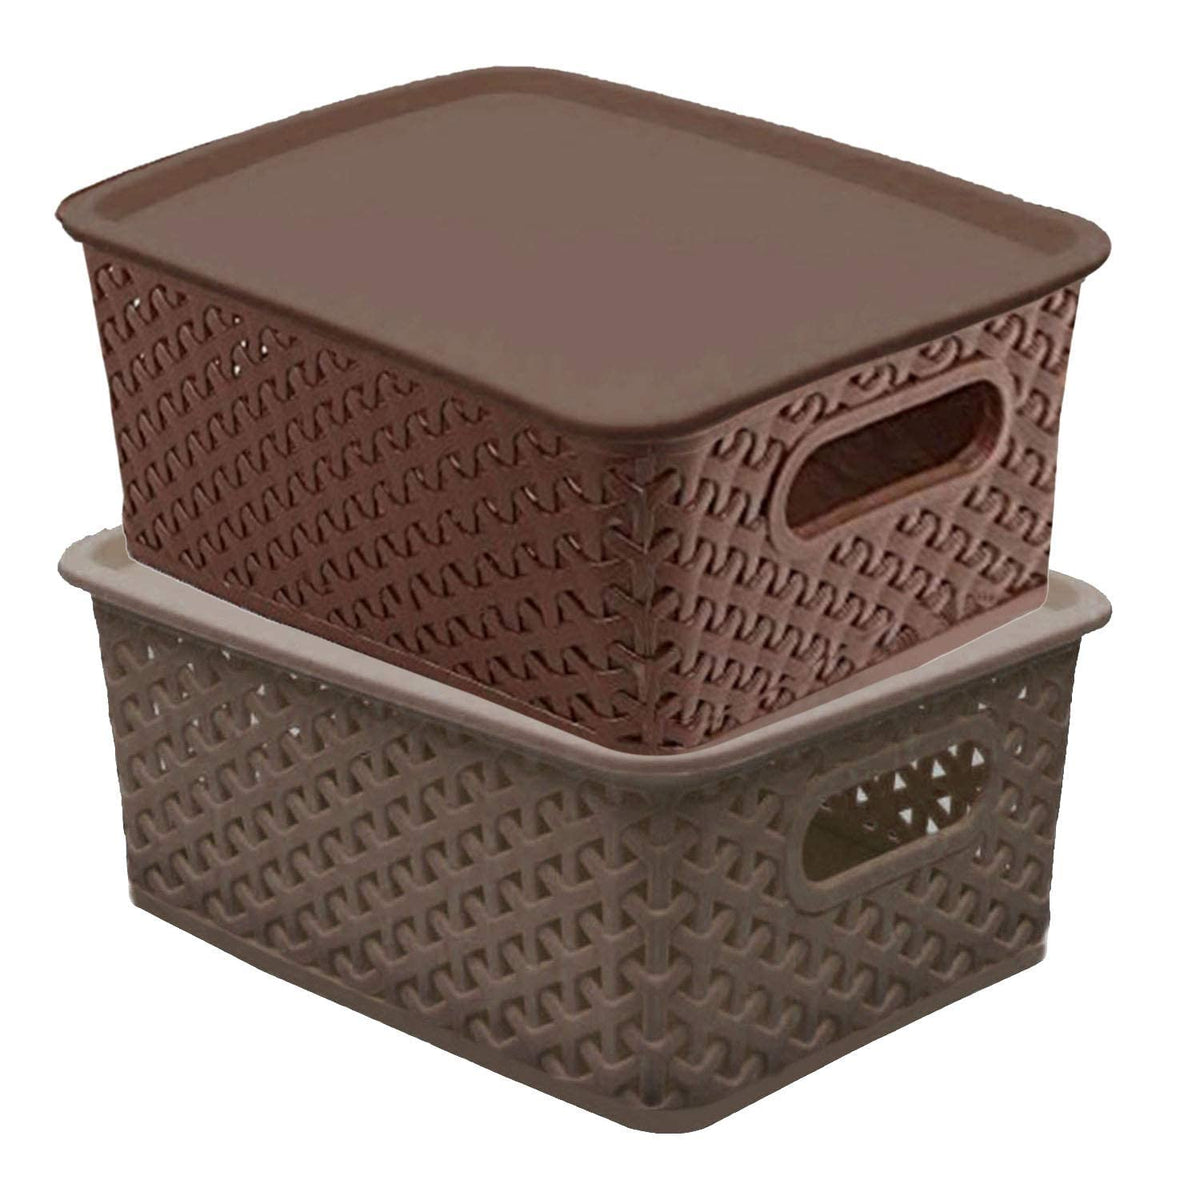 Kuber Industries Plastic 2 Pieces Small Size Multipurpose Solitaire Storage Basket with Lid (Multi)